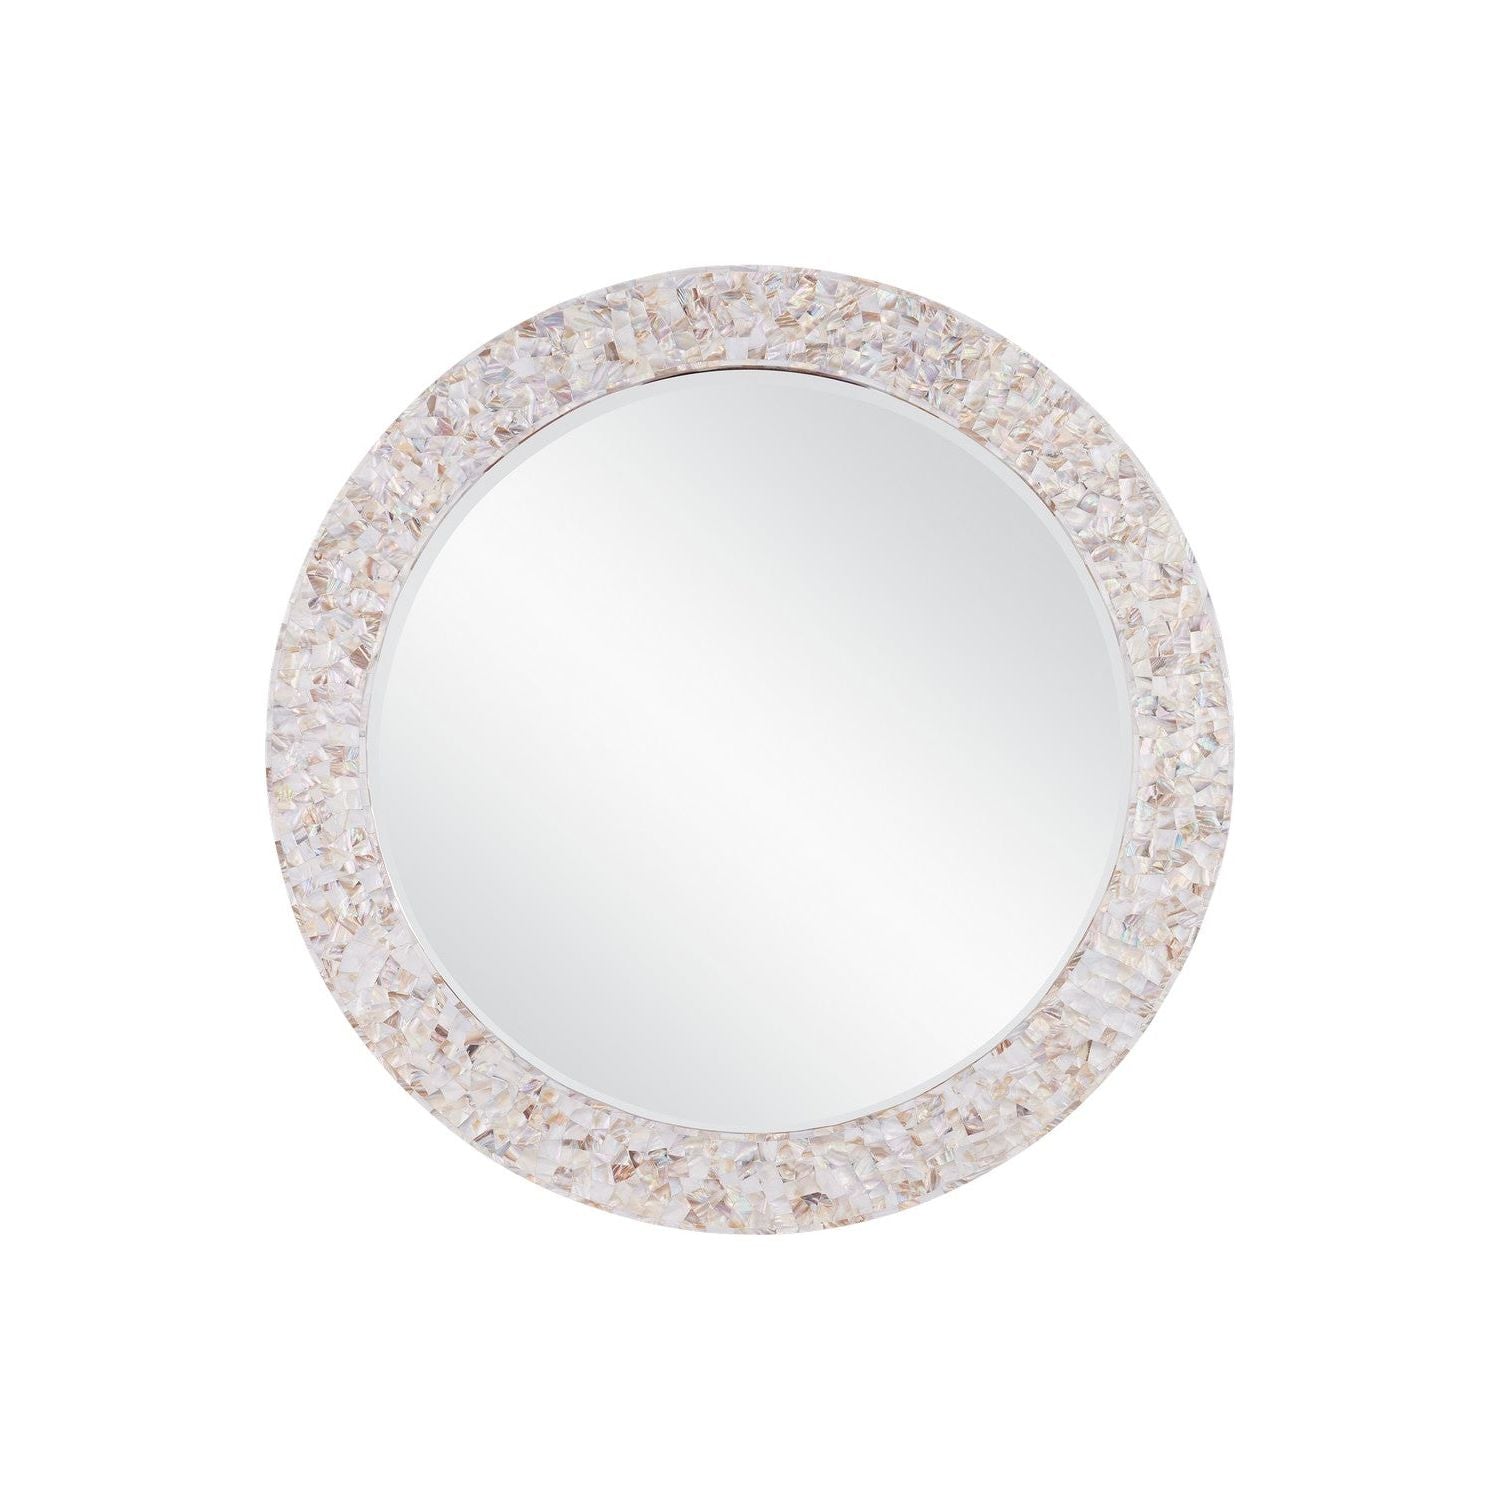 Currey and Company - 1000-0154 - Mirror - Natural/White/Mirror